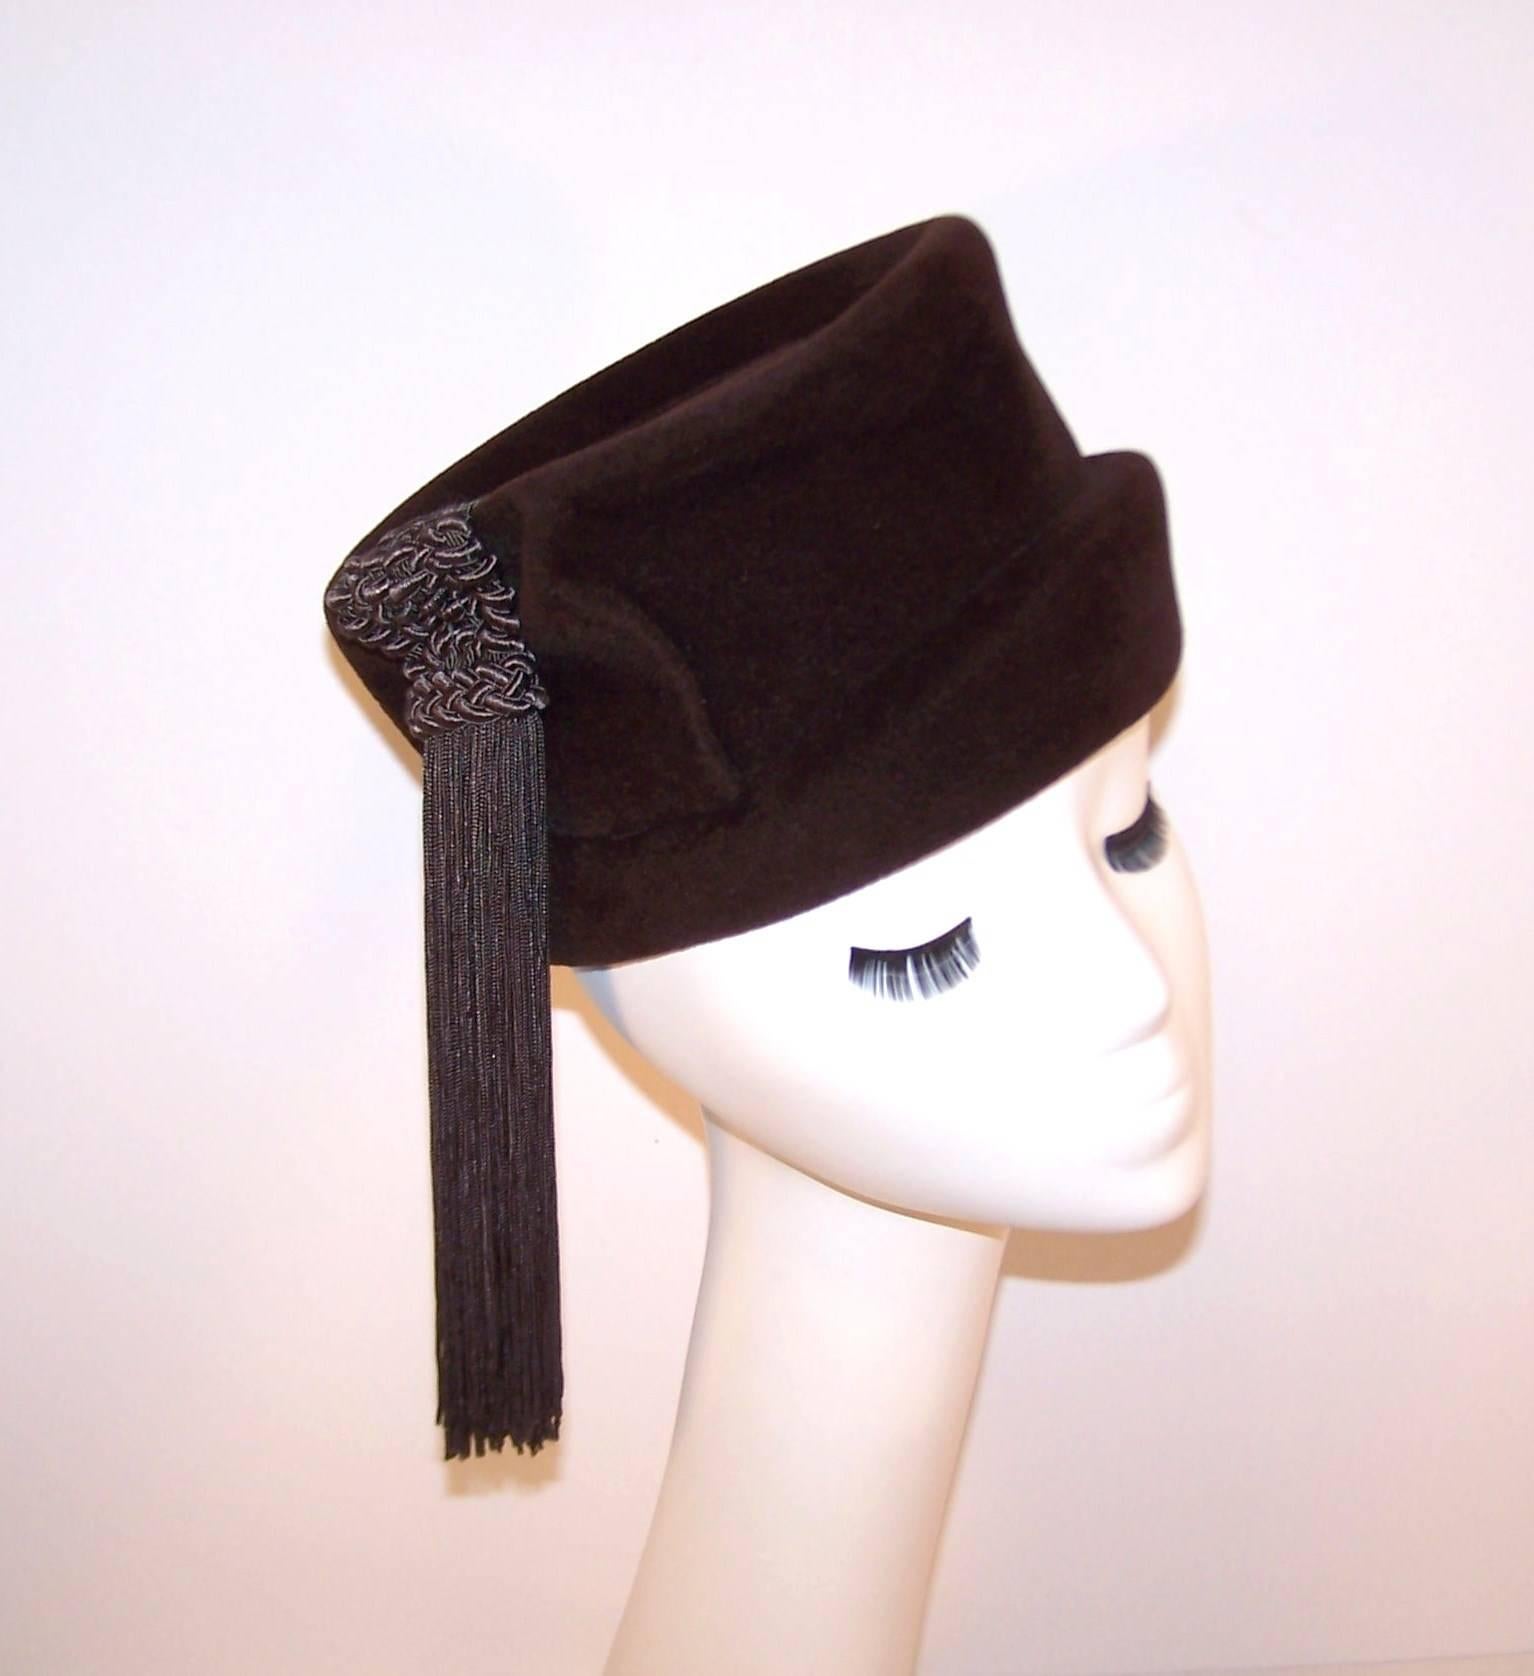 This Marion Valle hat is reminiscent of a ladies' fox hunting style hat from the same era.  The dark chocolate wool body is expertly crimped with a shallow brim and a braided silk tassel decoration adding visual interest and movement.  The hat form